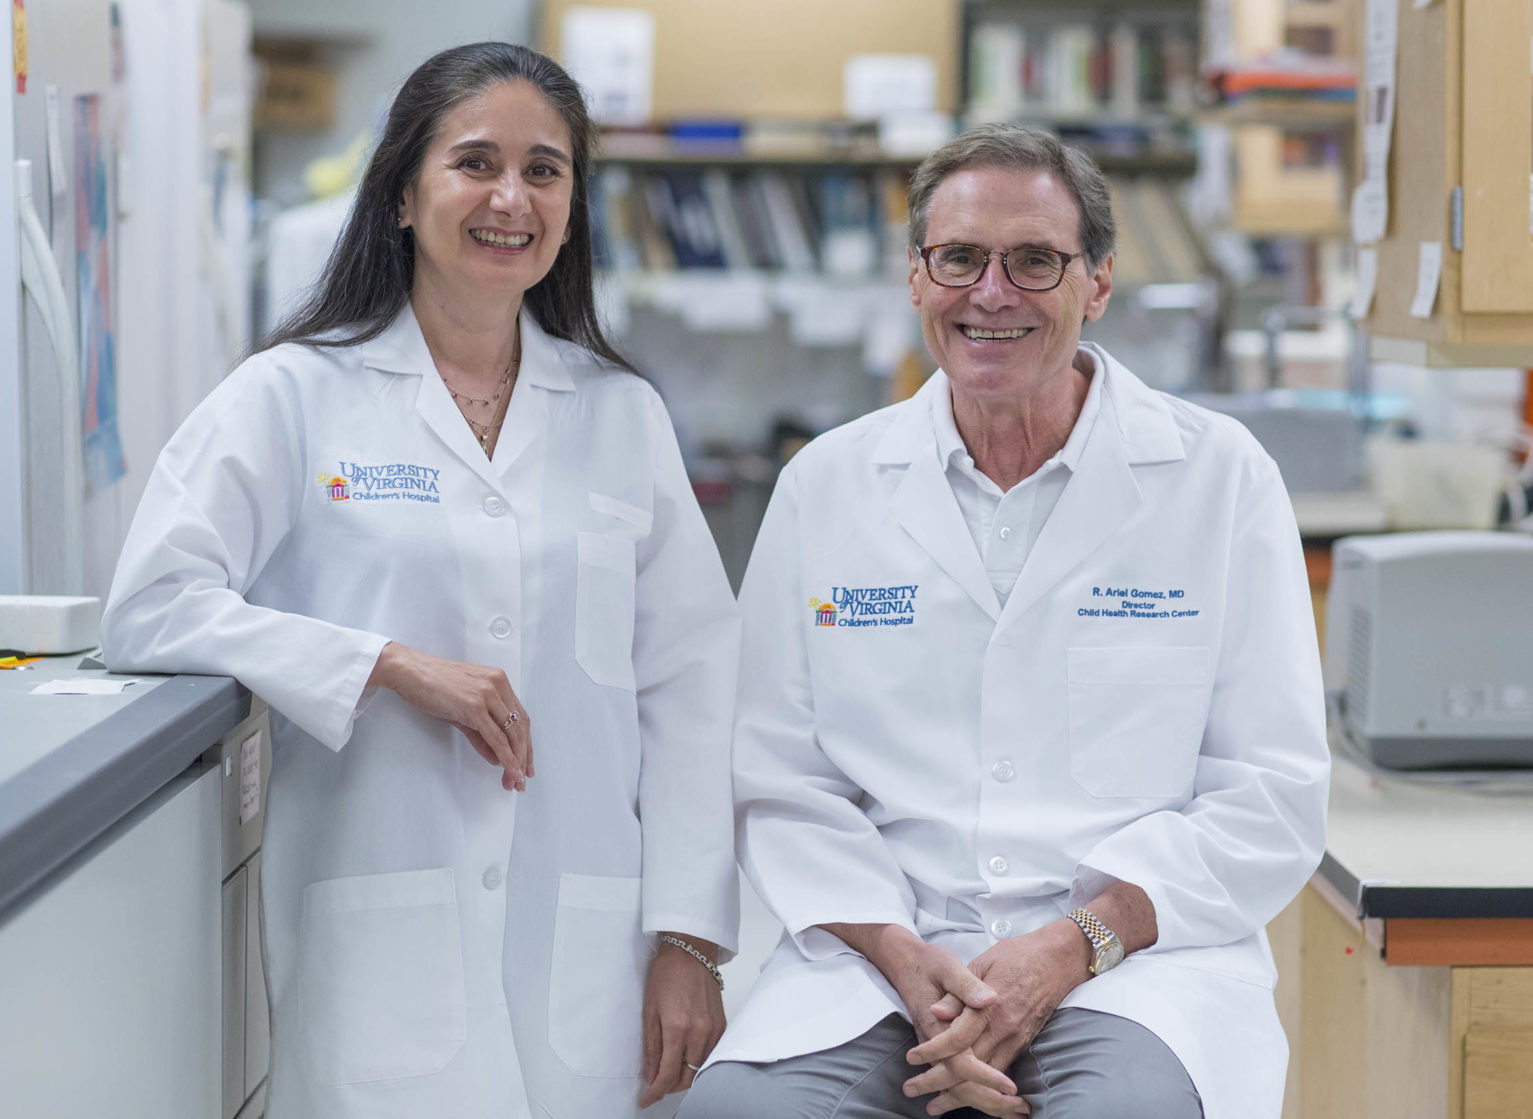 Headshots: Dr. Maria Luisa Sequeira Lopez, left, and Dr. Ariel Gomez, right